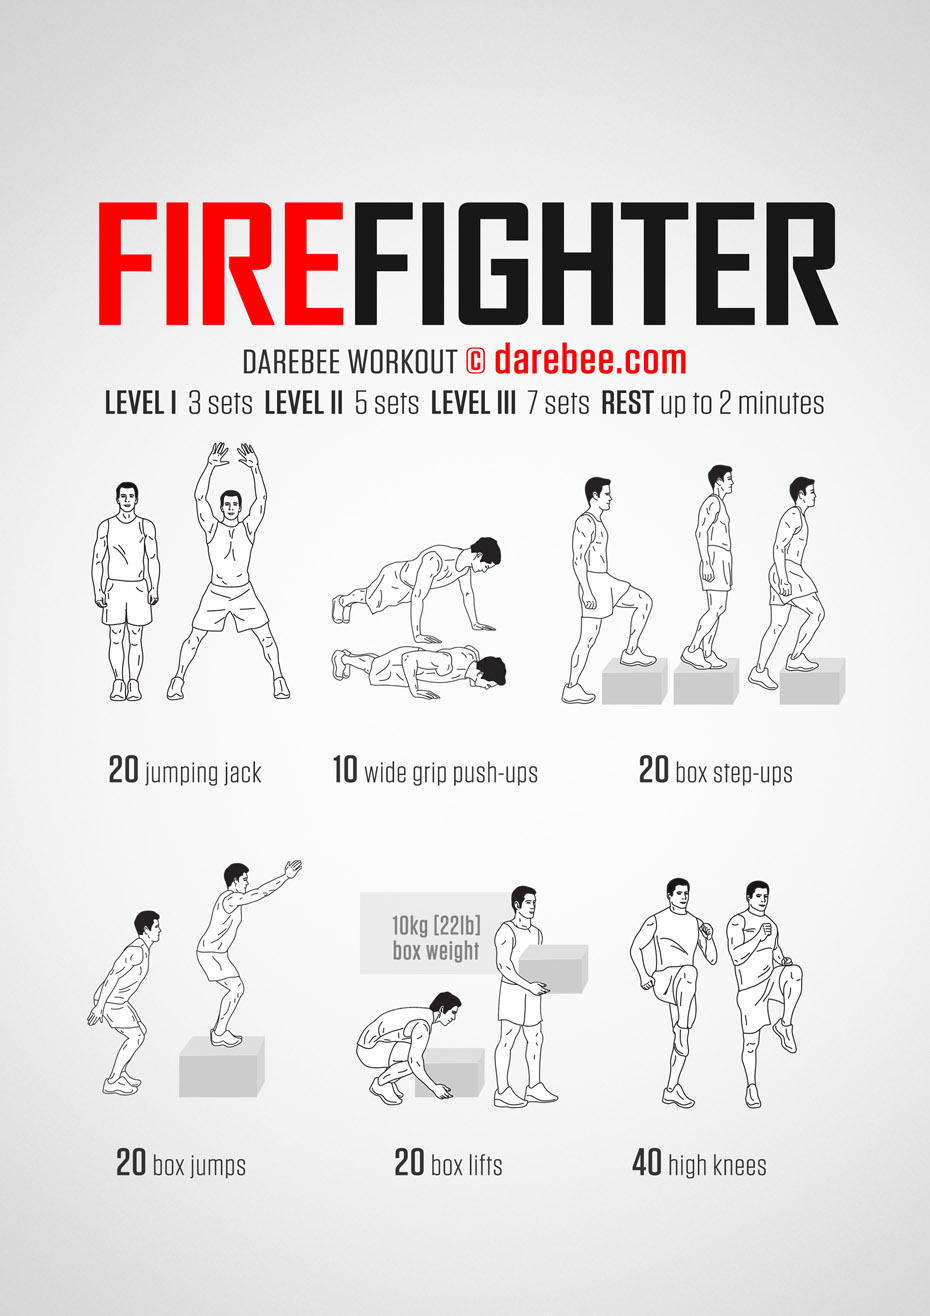 Firefighter is a Darebee home-fitness aerobic and cardiovascular endurance workout.